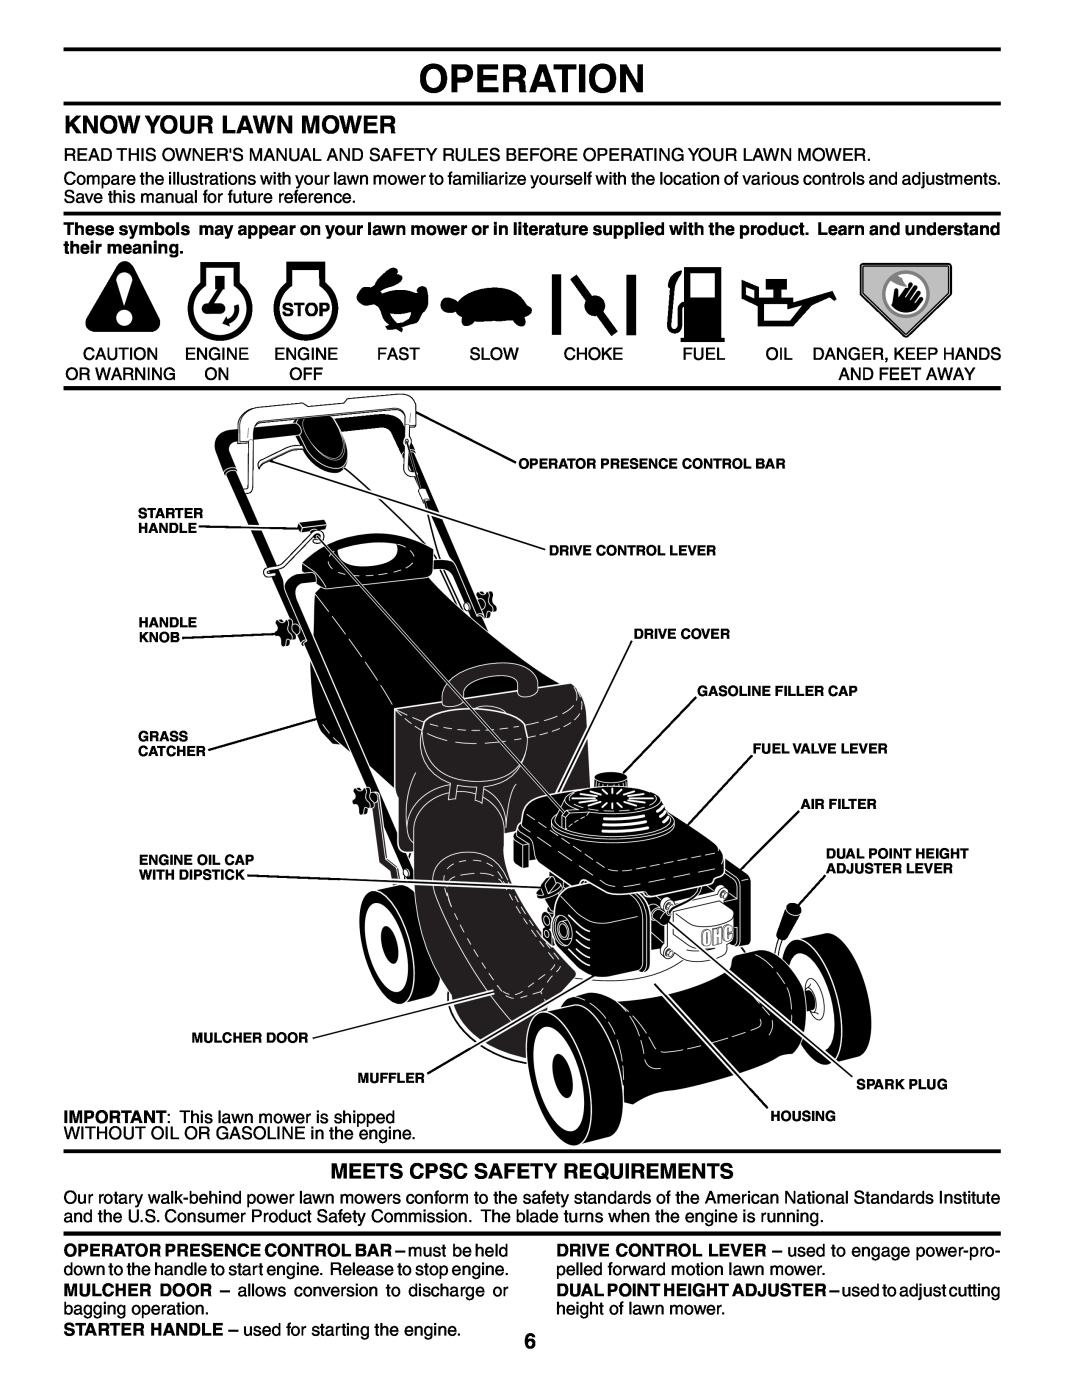 Husqvarna 55R21HV owner manual Operation, Know Your Lawn Mower, Meets Cpsc Safety Requirements 